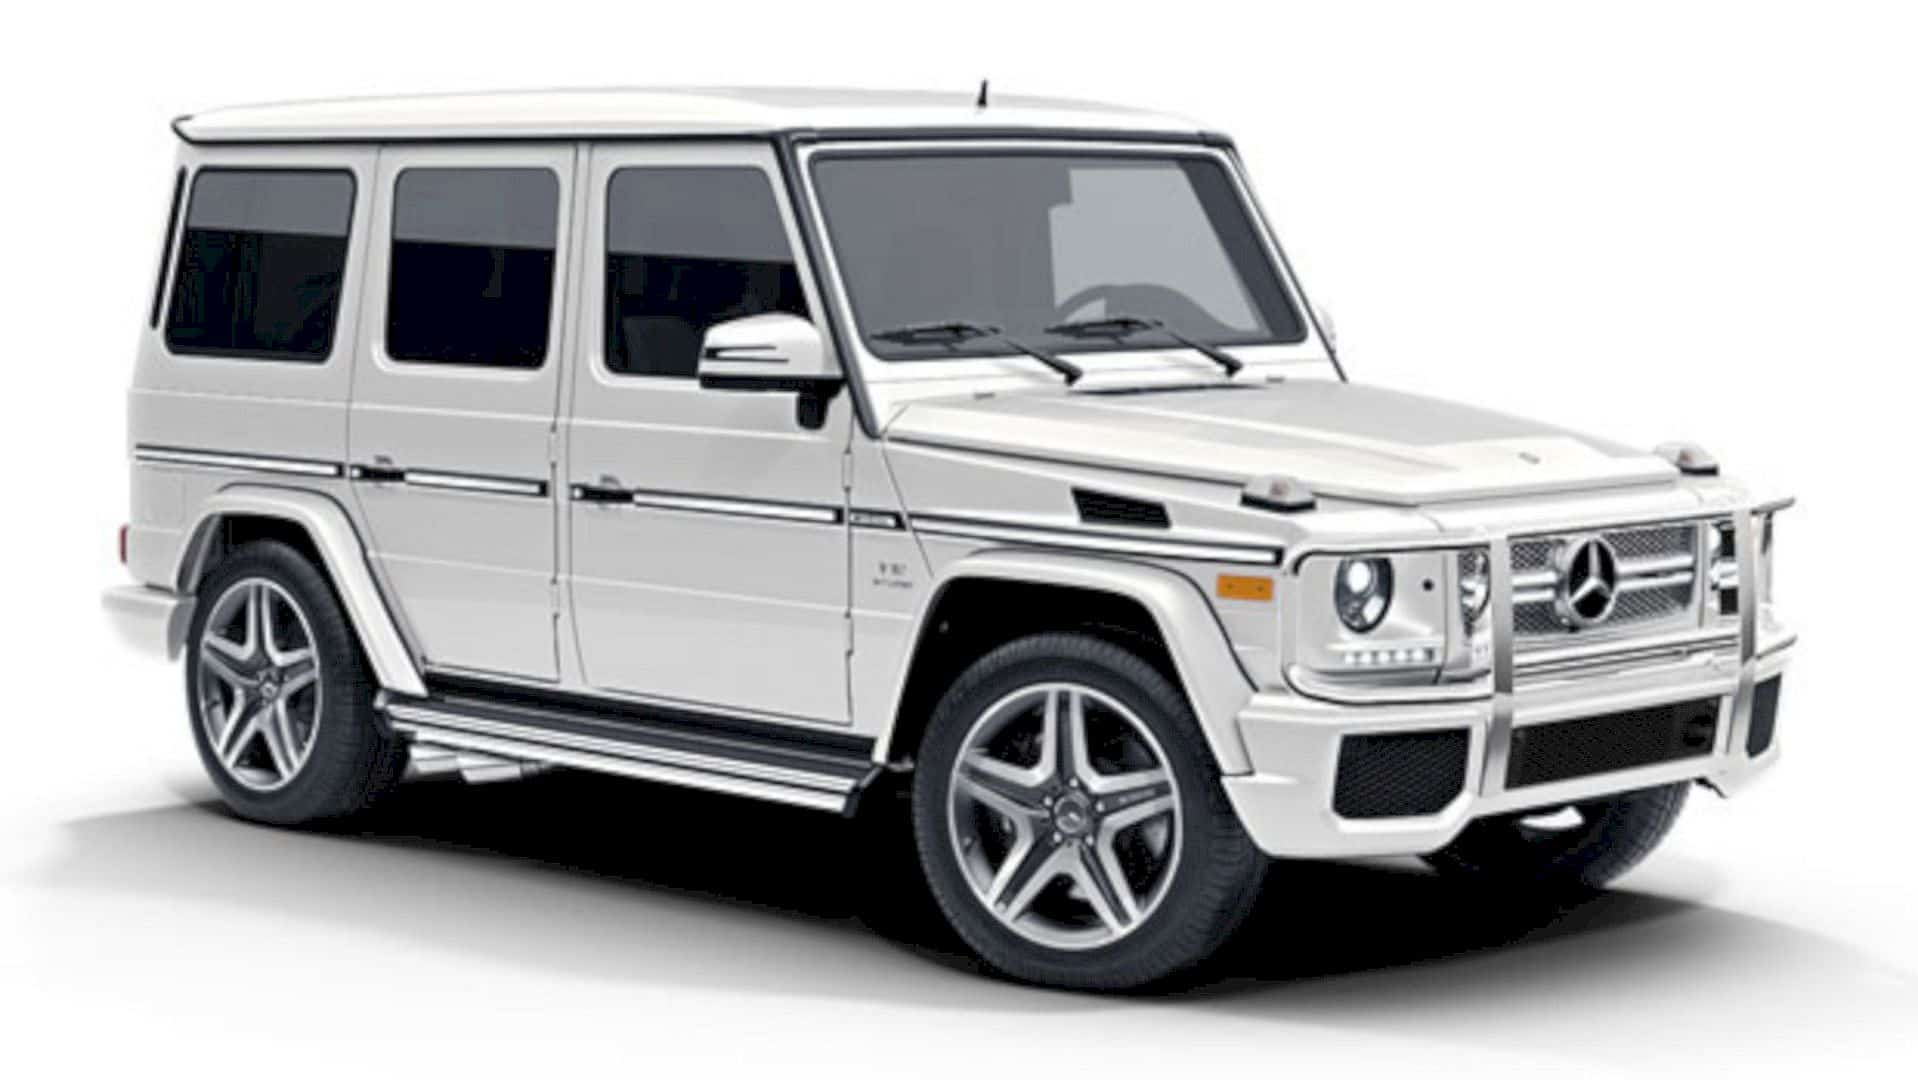 Amg G 65 Suv By Marcedes Benz 5